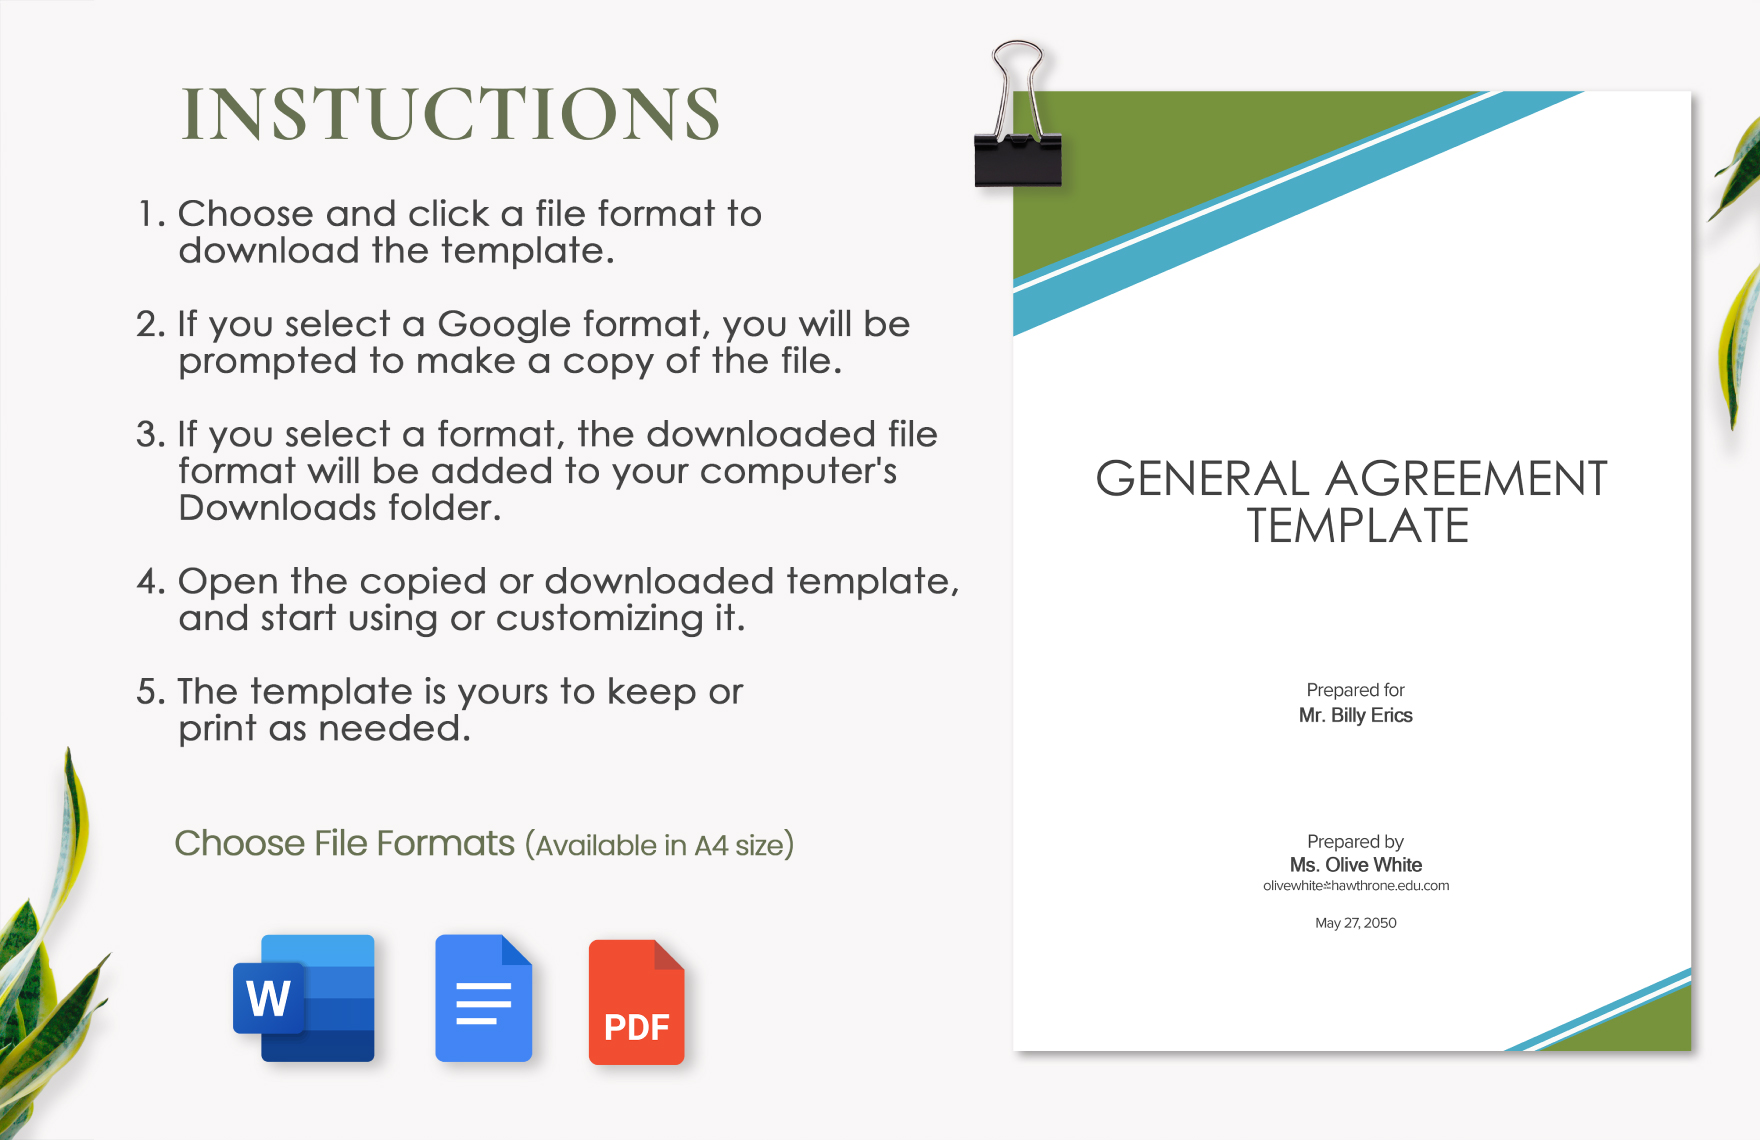 General Agreement Template